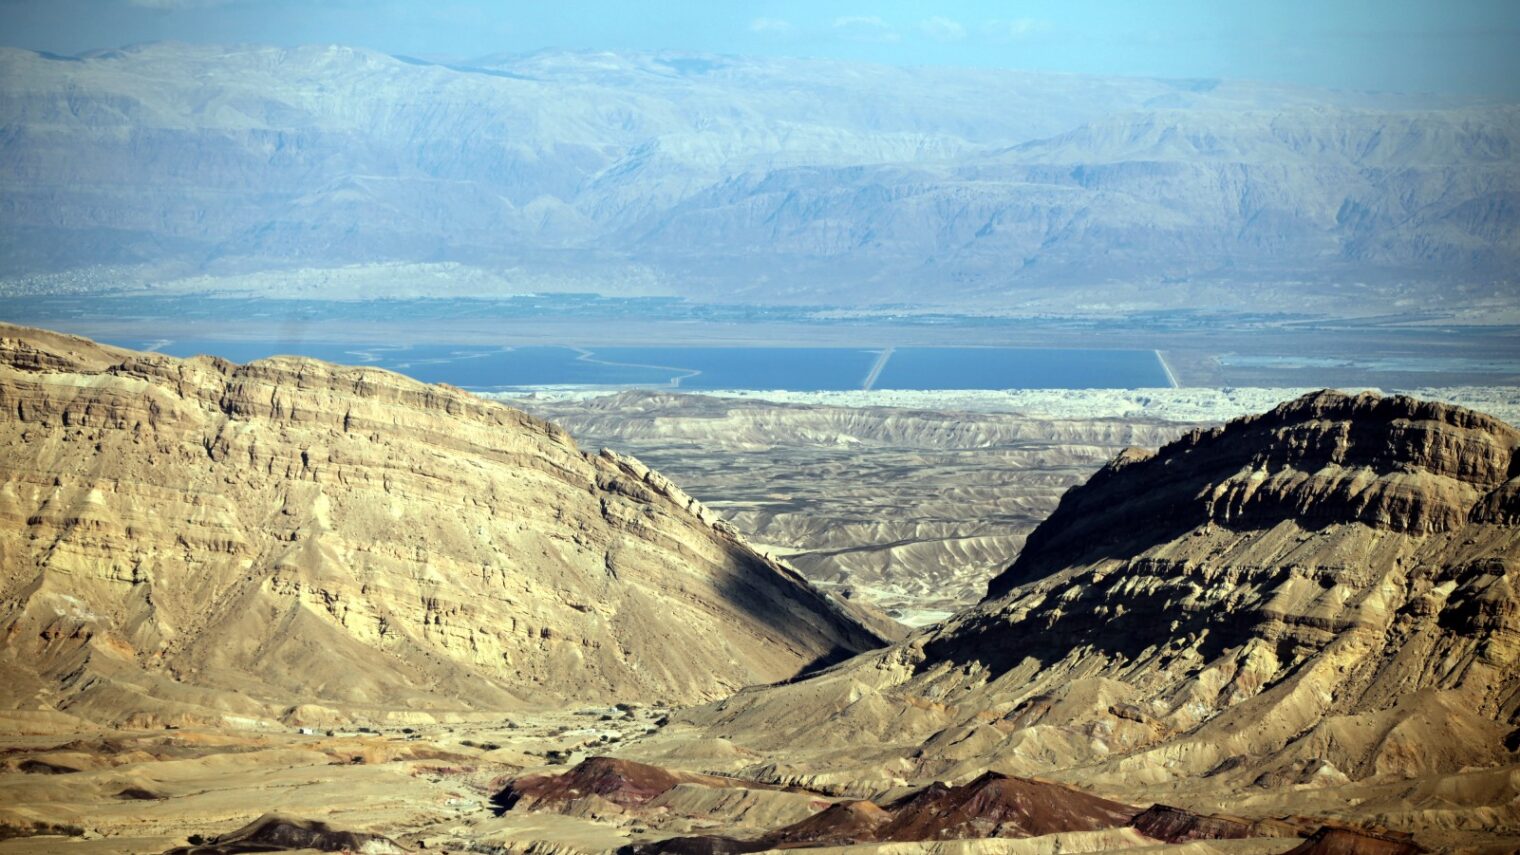 The Small Crater in Israel's Negev desert is now an official nature reserve. Photo by Yossi Zamir/Flash90